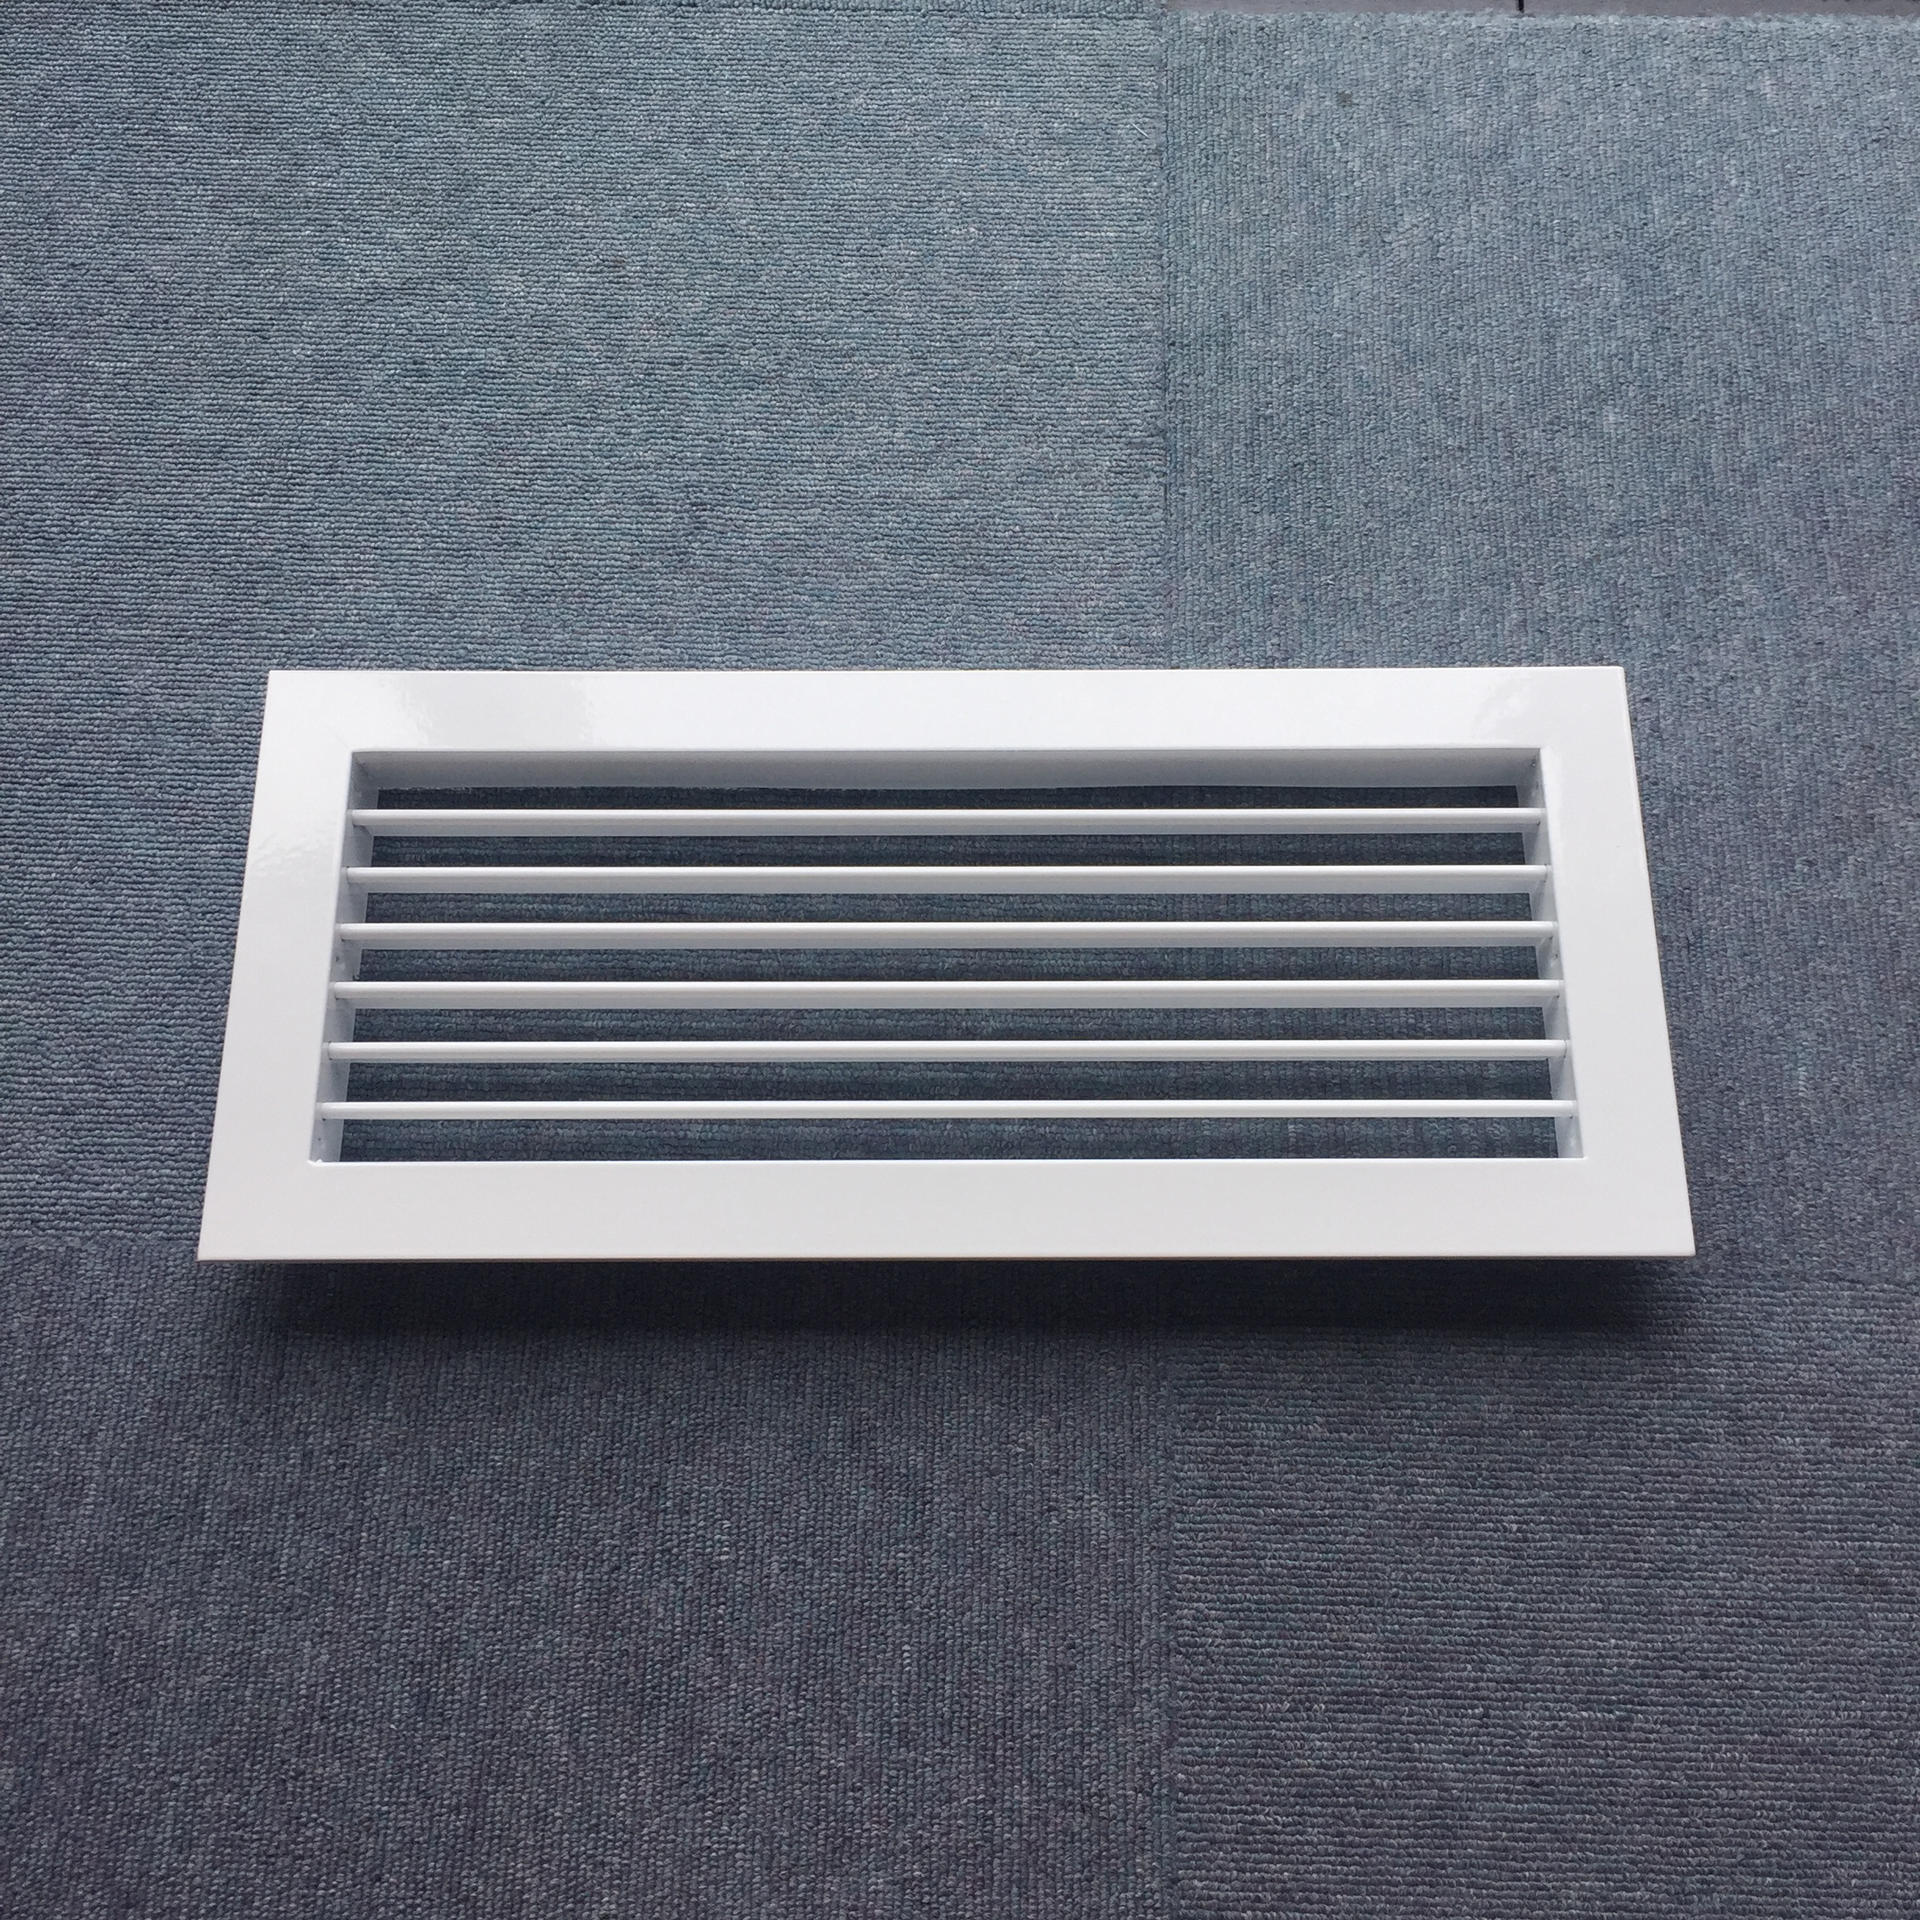 HVAC SYSTEM  Best Quality Wall Mounted Air Ducting   Aluminum Supply Air Single Deflection Grille for Ventilation